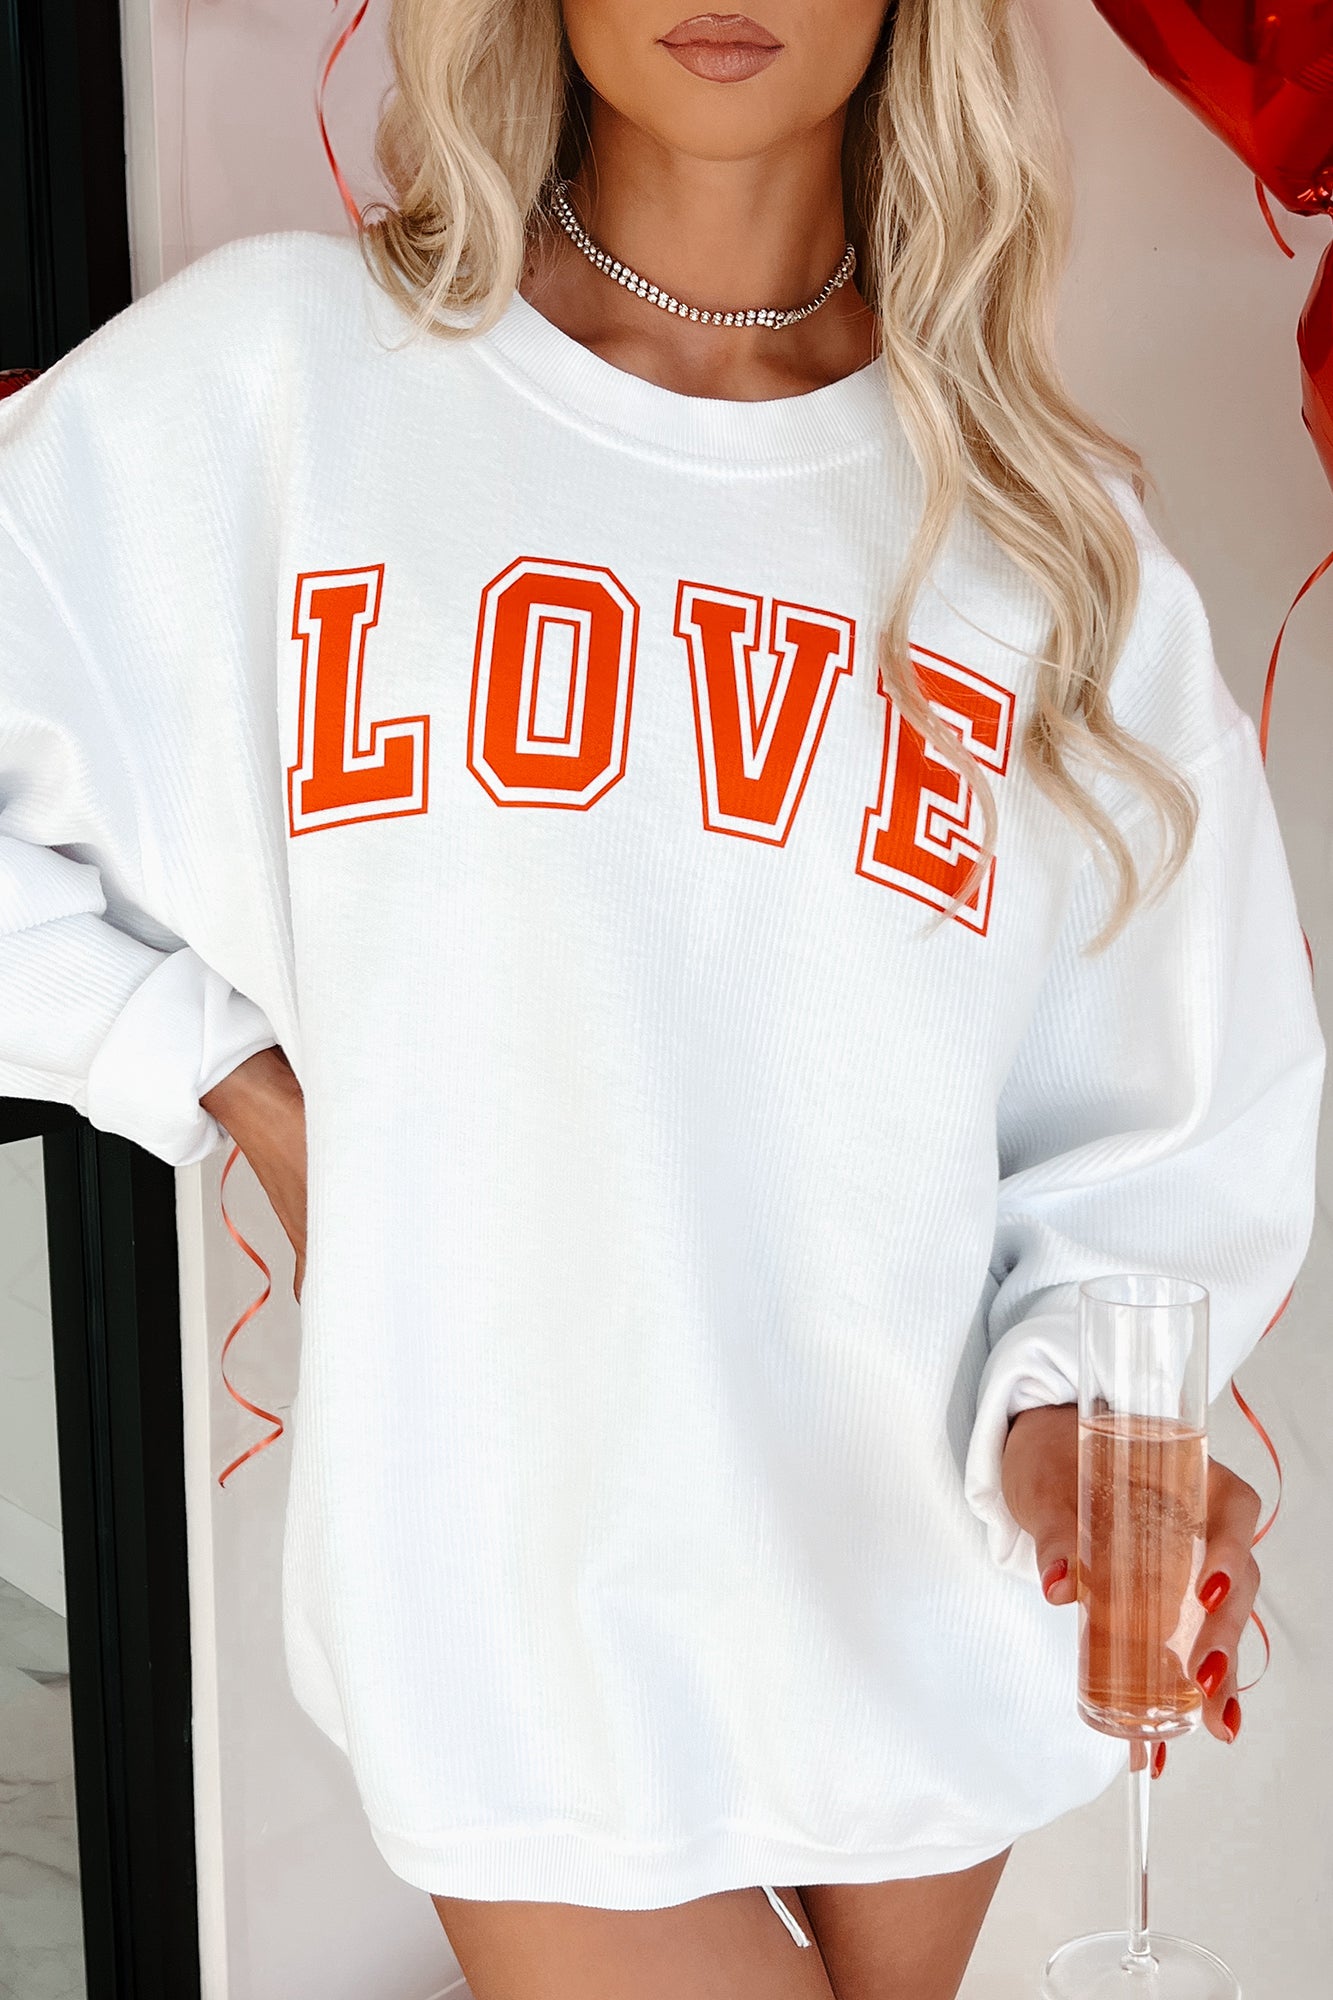 My Only Love Corded Graphic Crewneck (White) - Print On Demand - NanaMacs